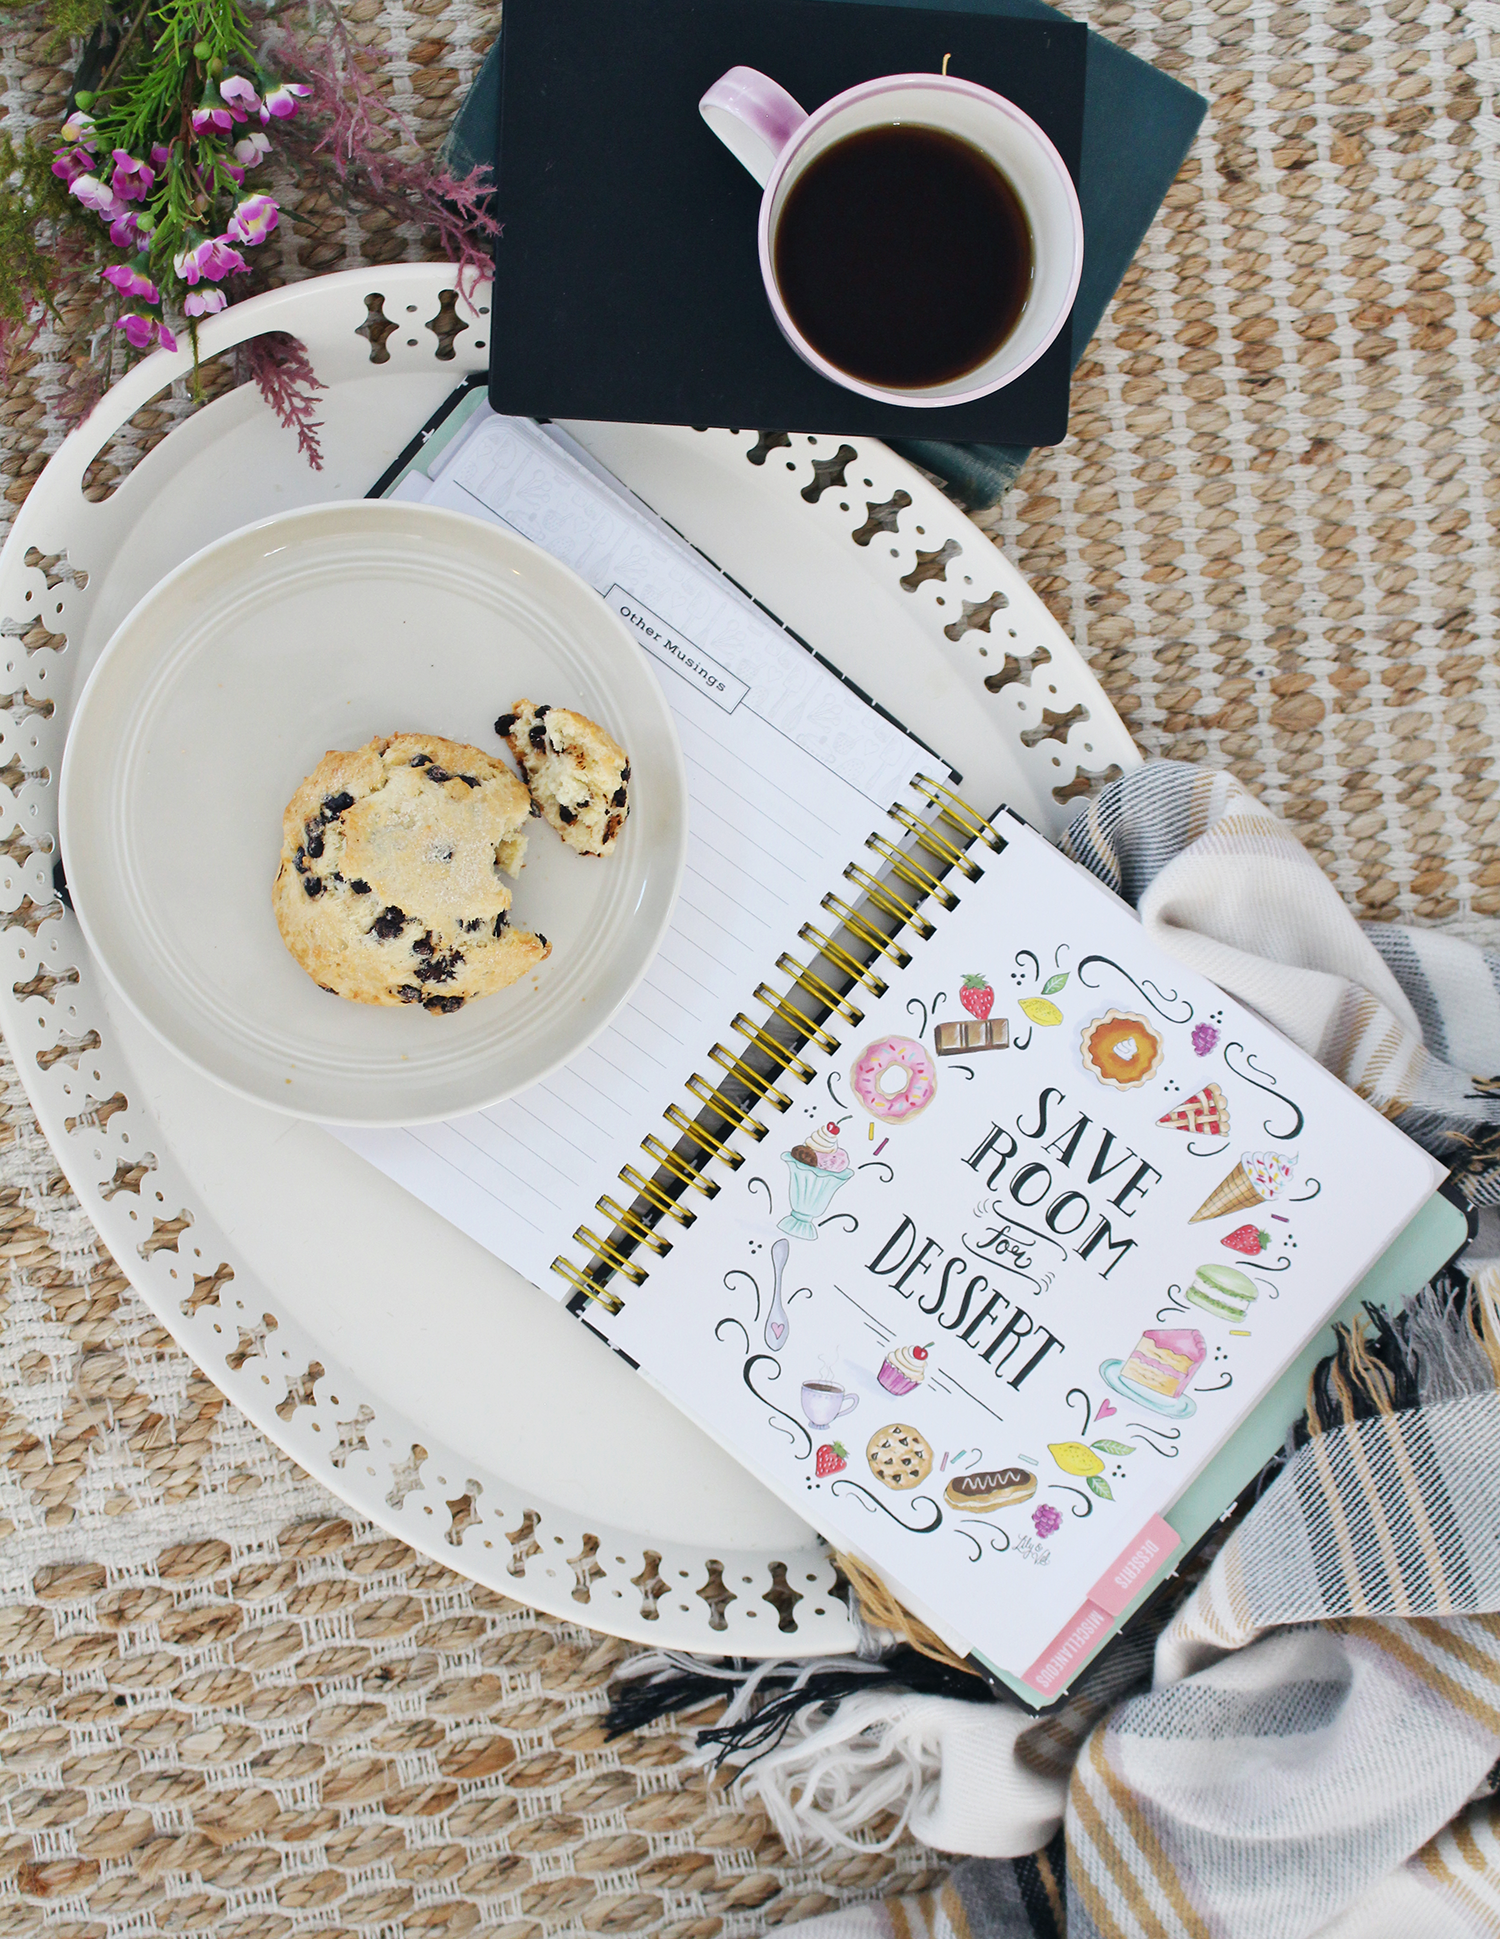 Every tab in the Keepsake Kitchen Diary features a hand-drawn illustration by Valerie McKeehan